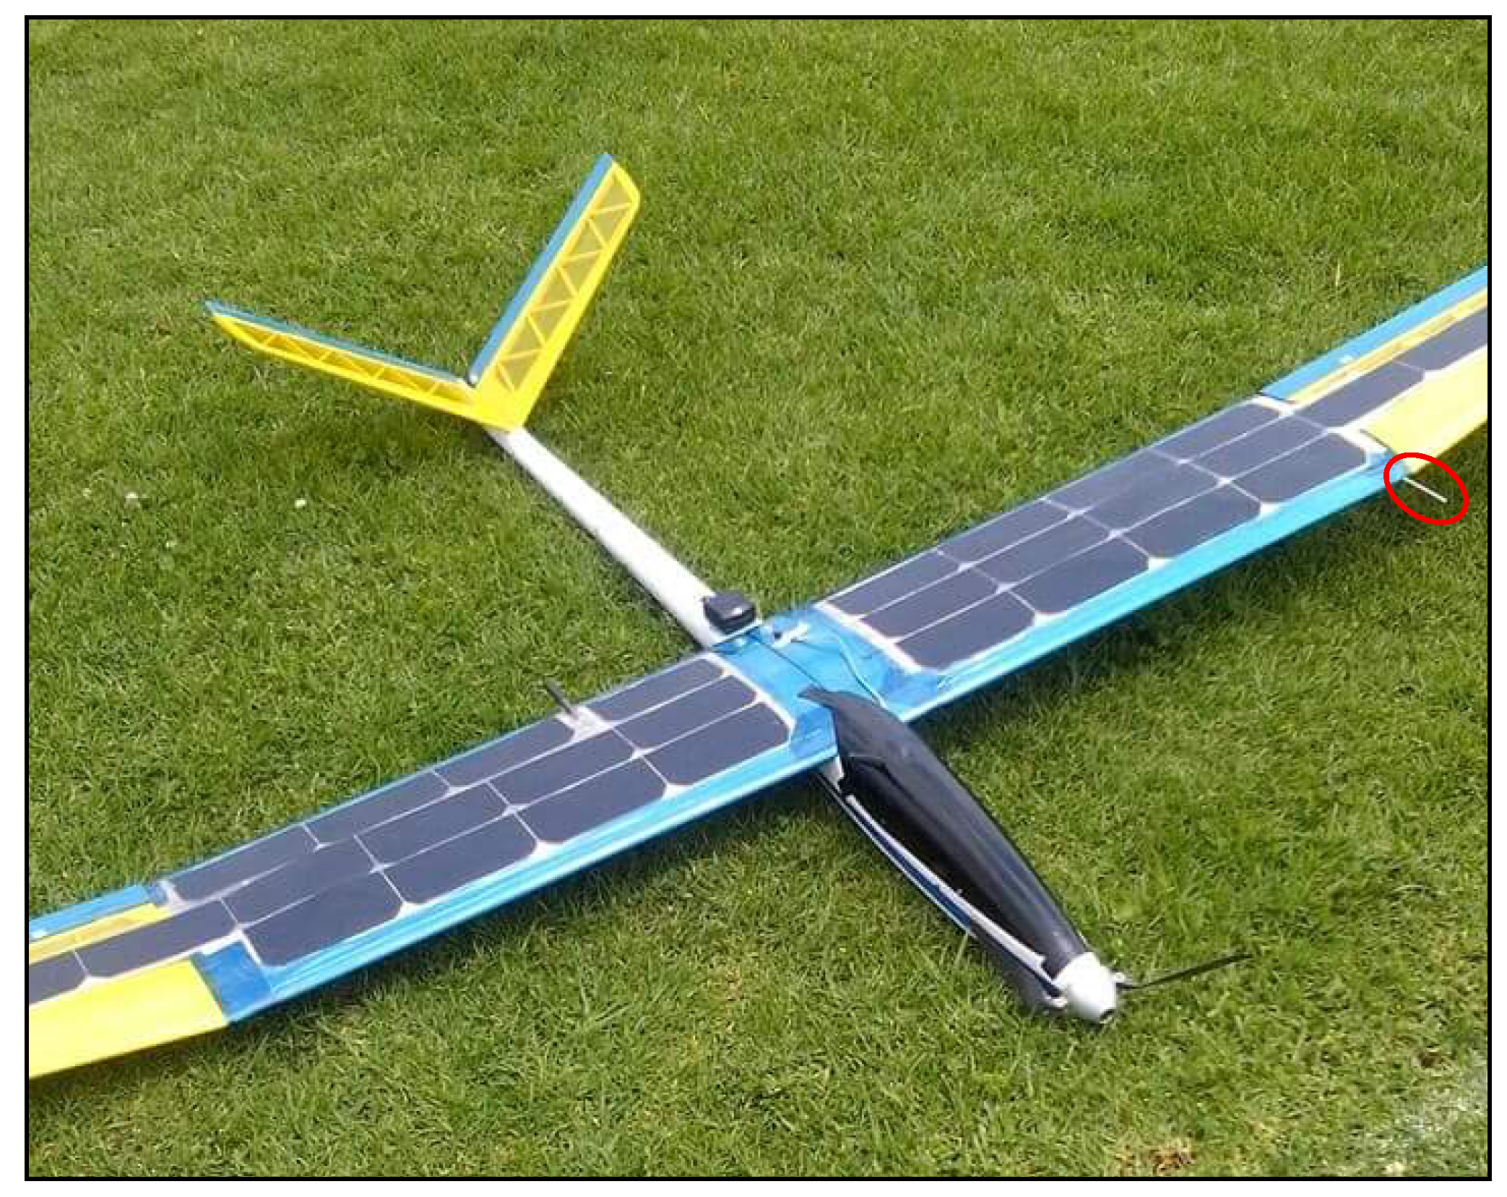 Drones | Free Full-Text | Sun Tracking Technique Applied to a Solar  Unmanned Aerial Vehicle